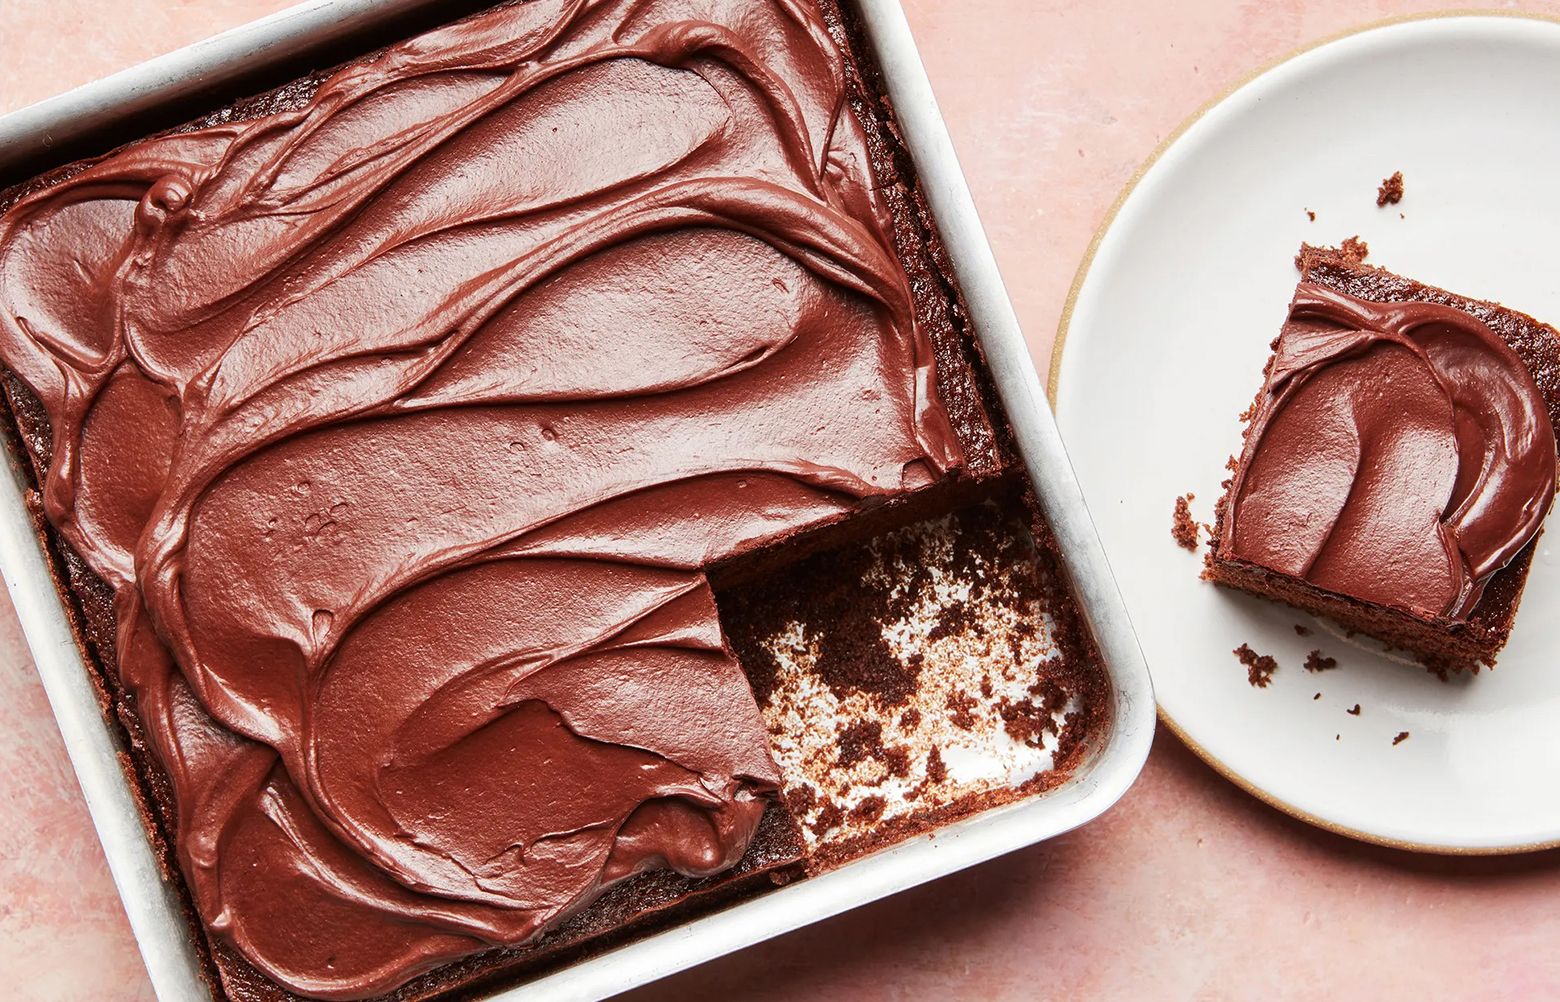 The BEST Chocolate Frosting - Scientifically Sweet